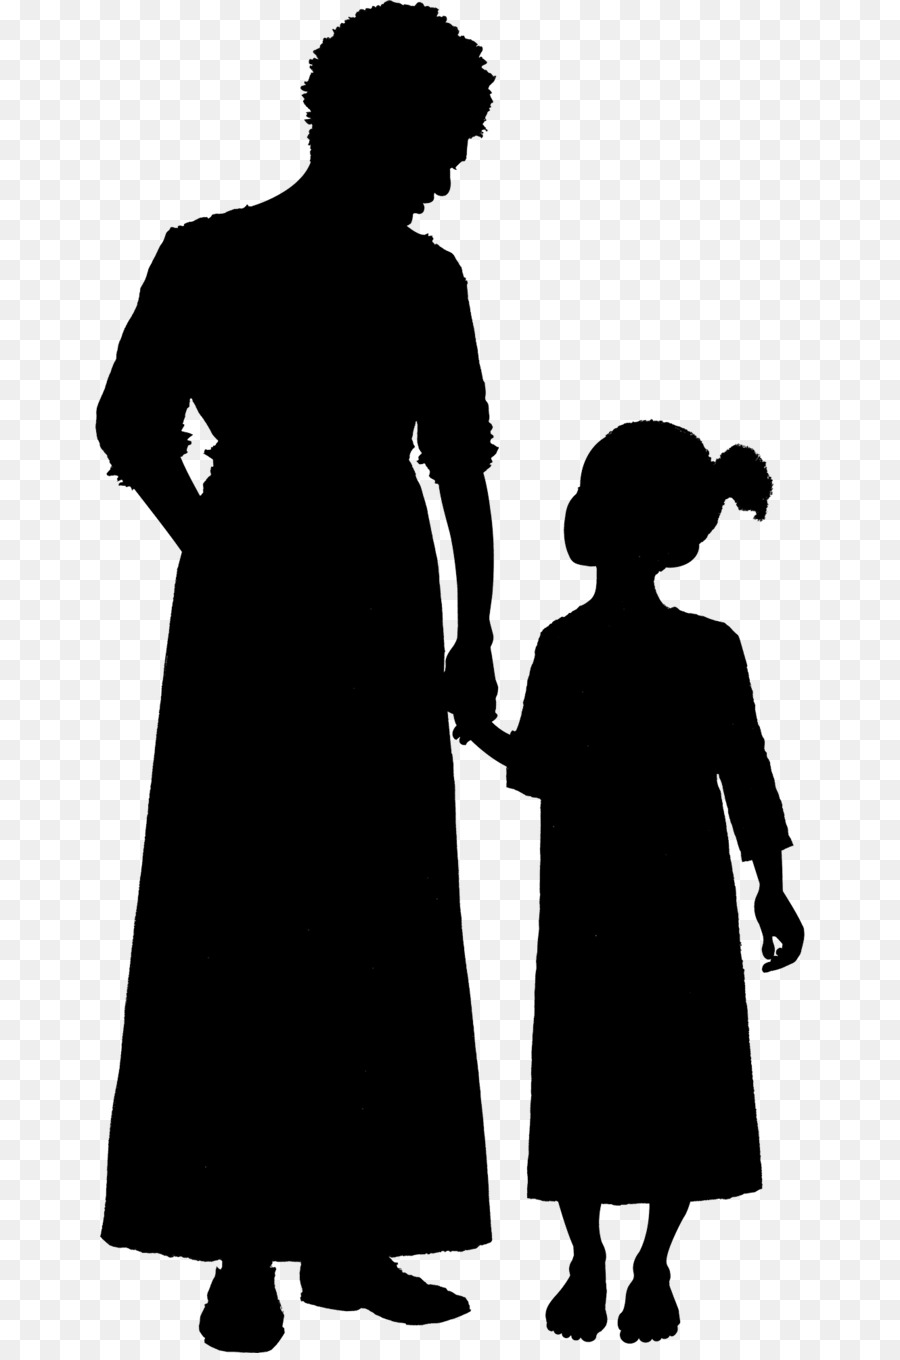 Silhouette Woman Child Clip art - old woman png download - 1330*2000 - Free Transparent  png Download.